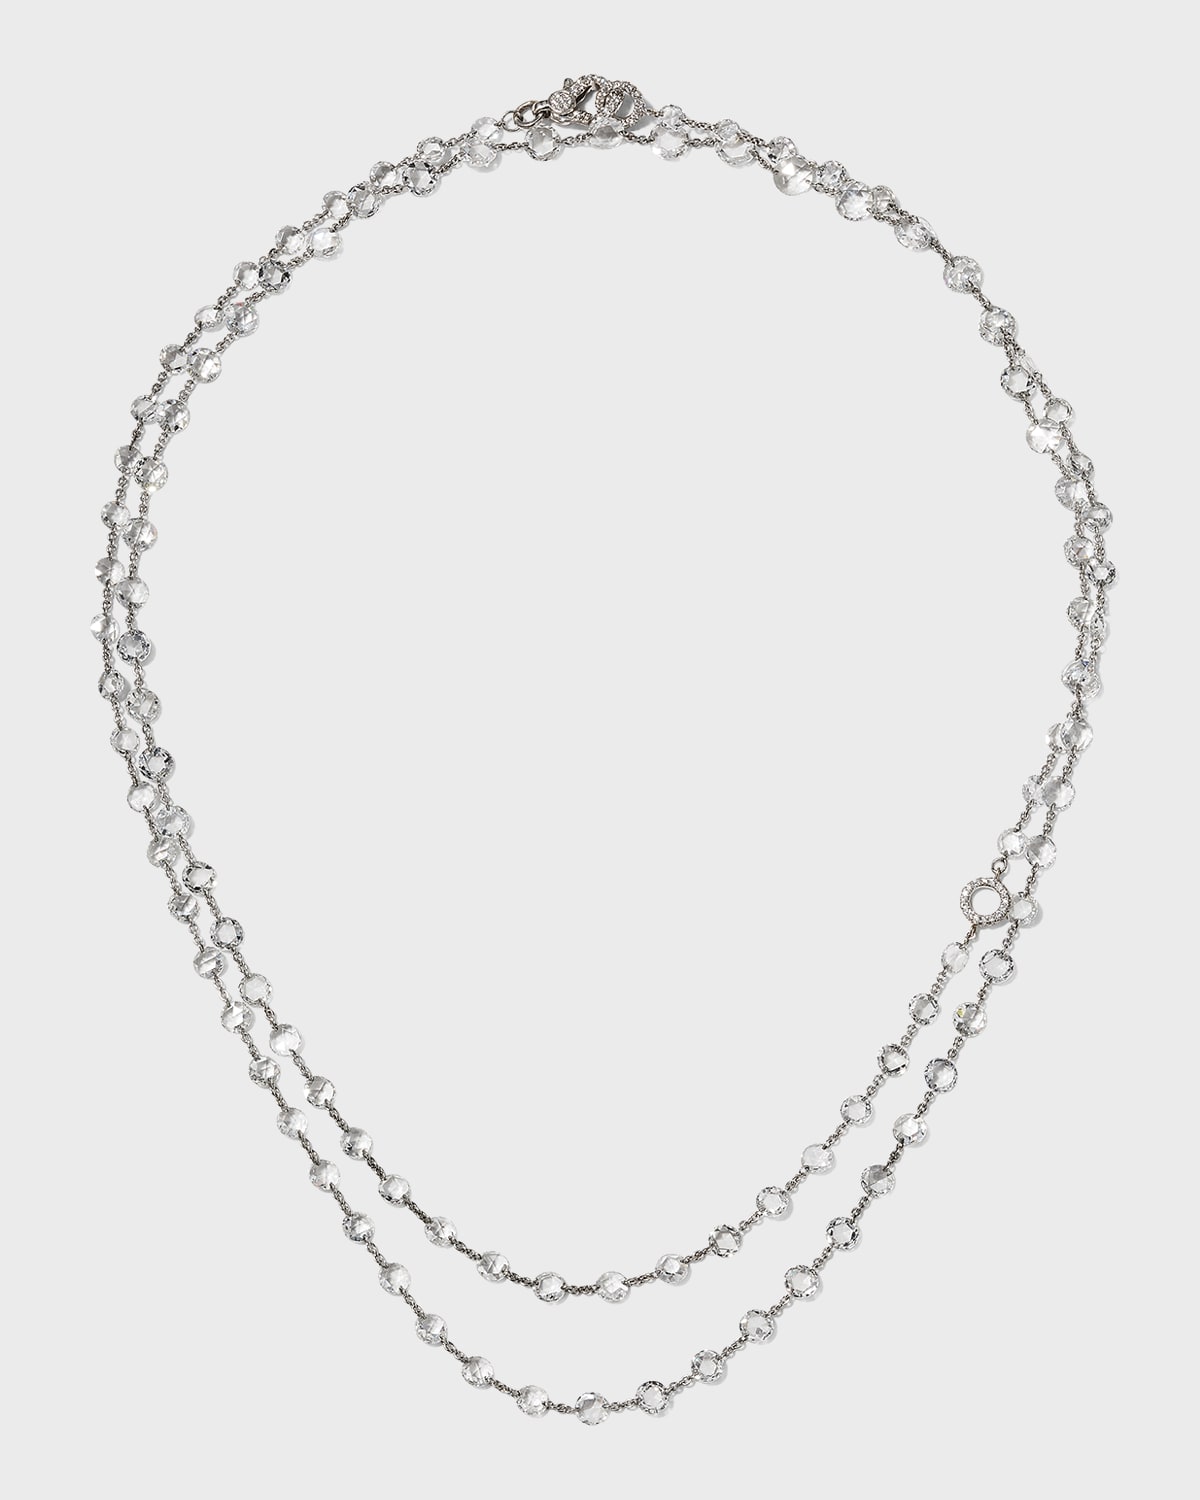 Rose-Cut and Brilliant-Cut Floating Diamond Necklace, 32"L